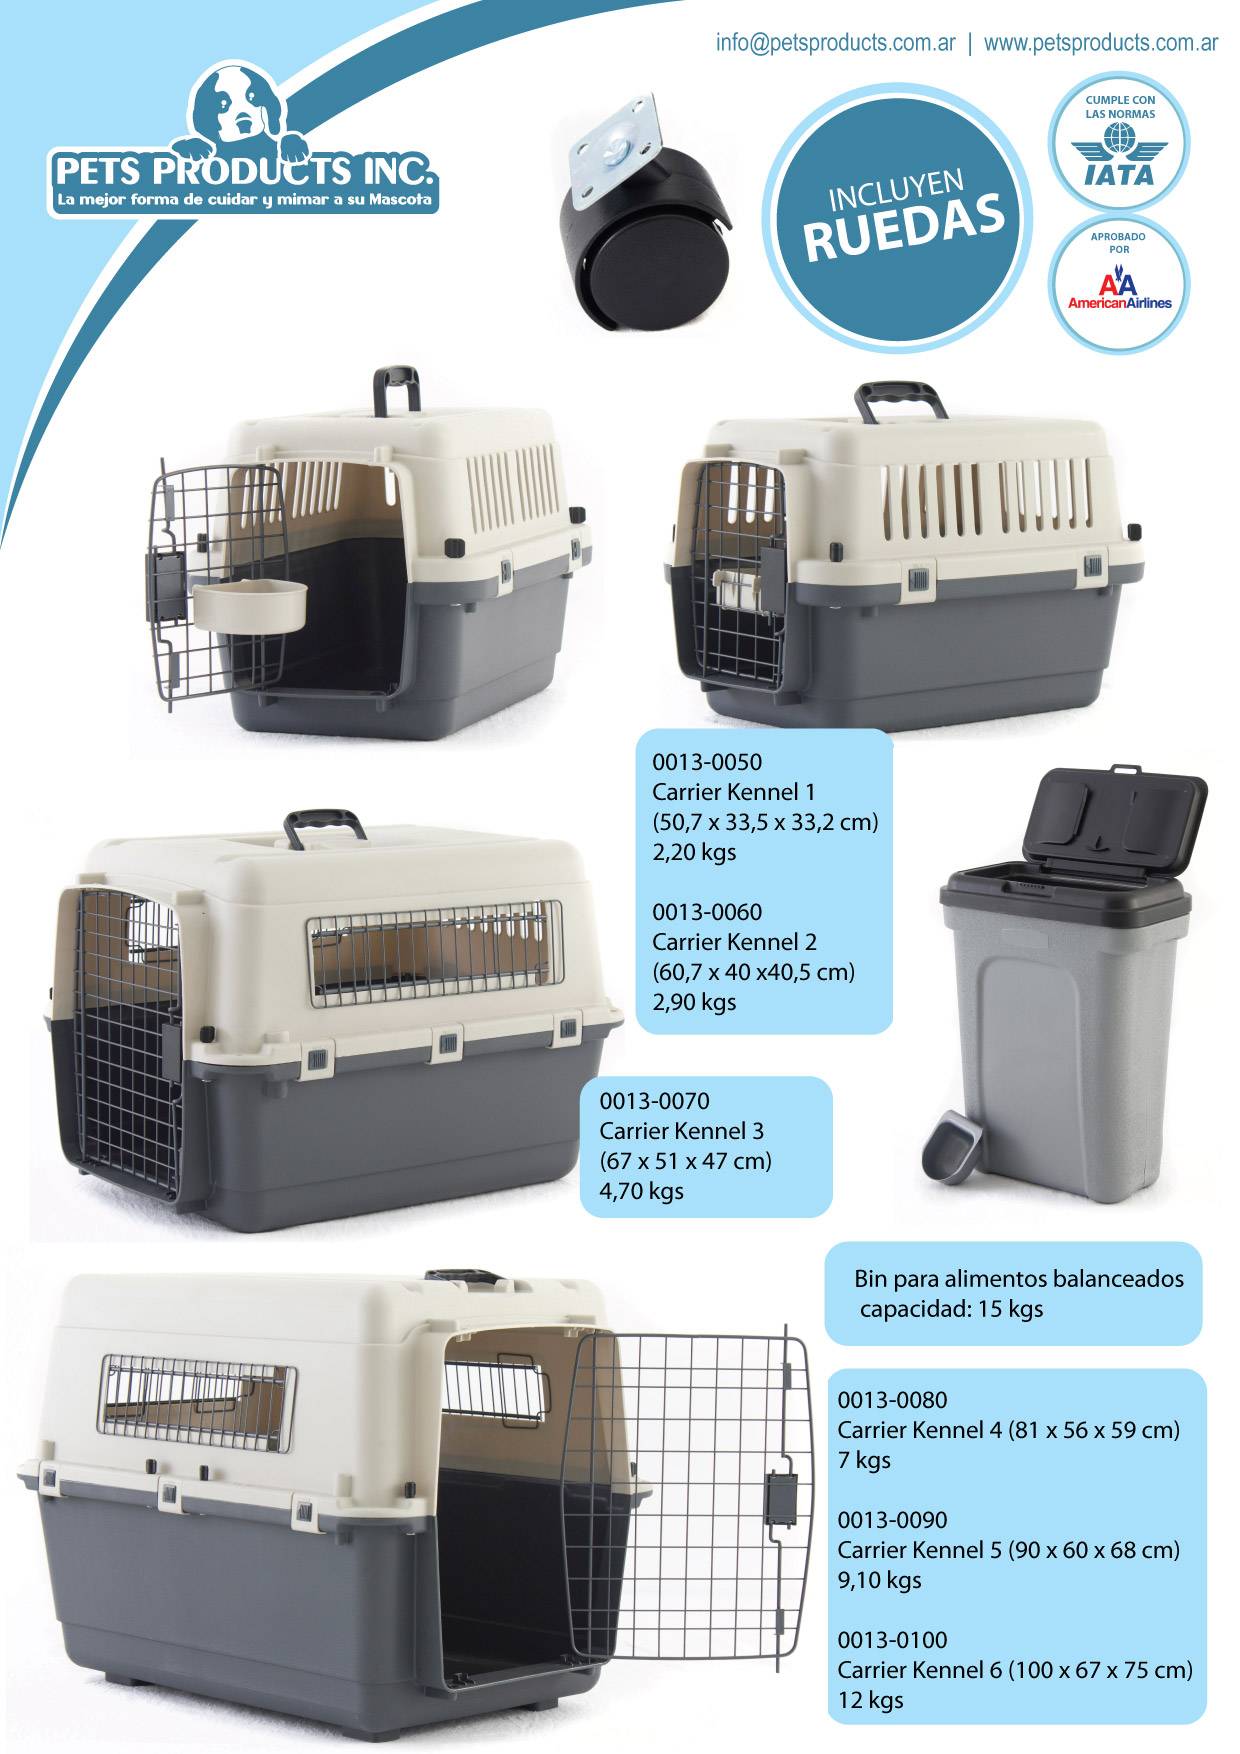 PETSPRODUCTS Carrier kennel